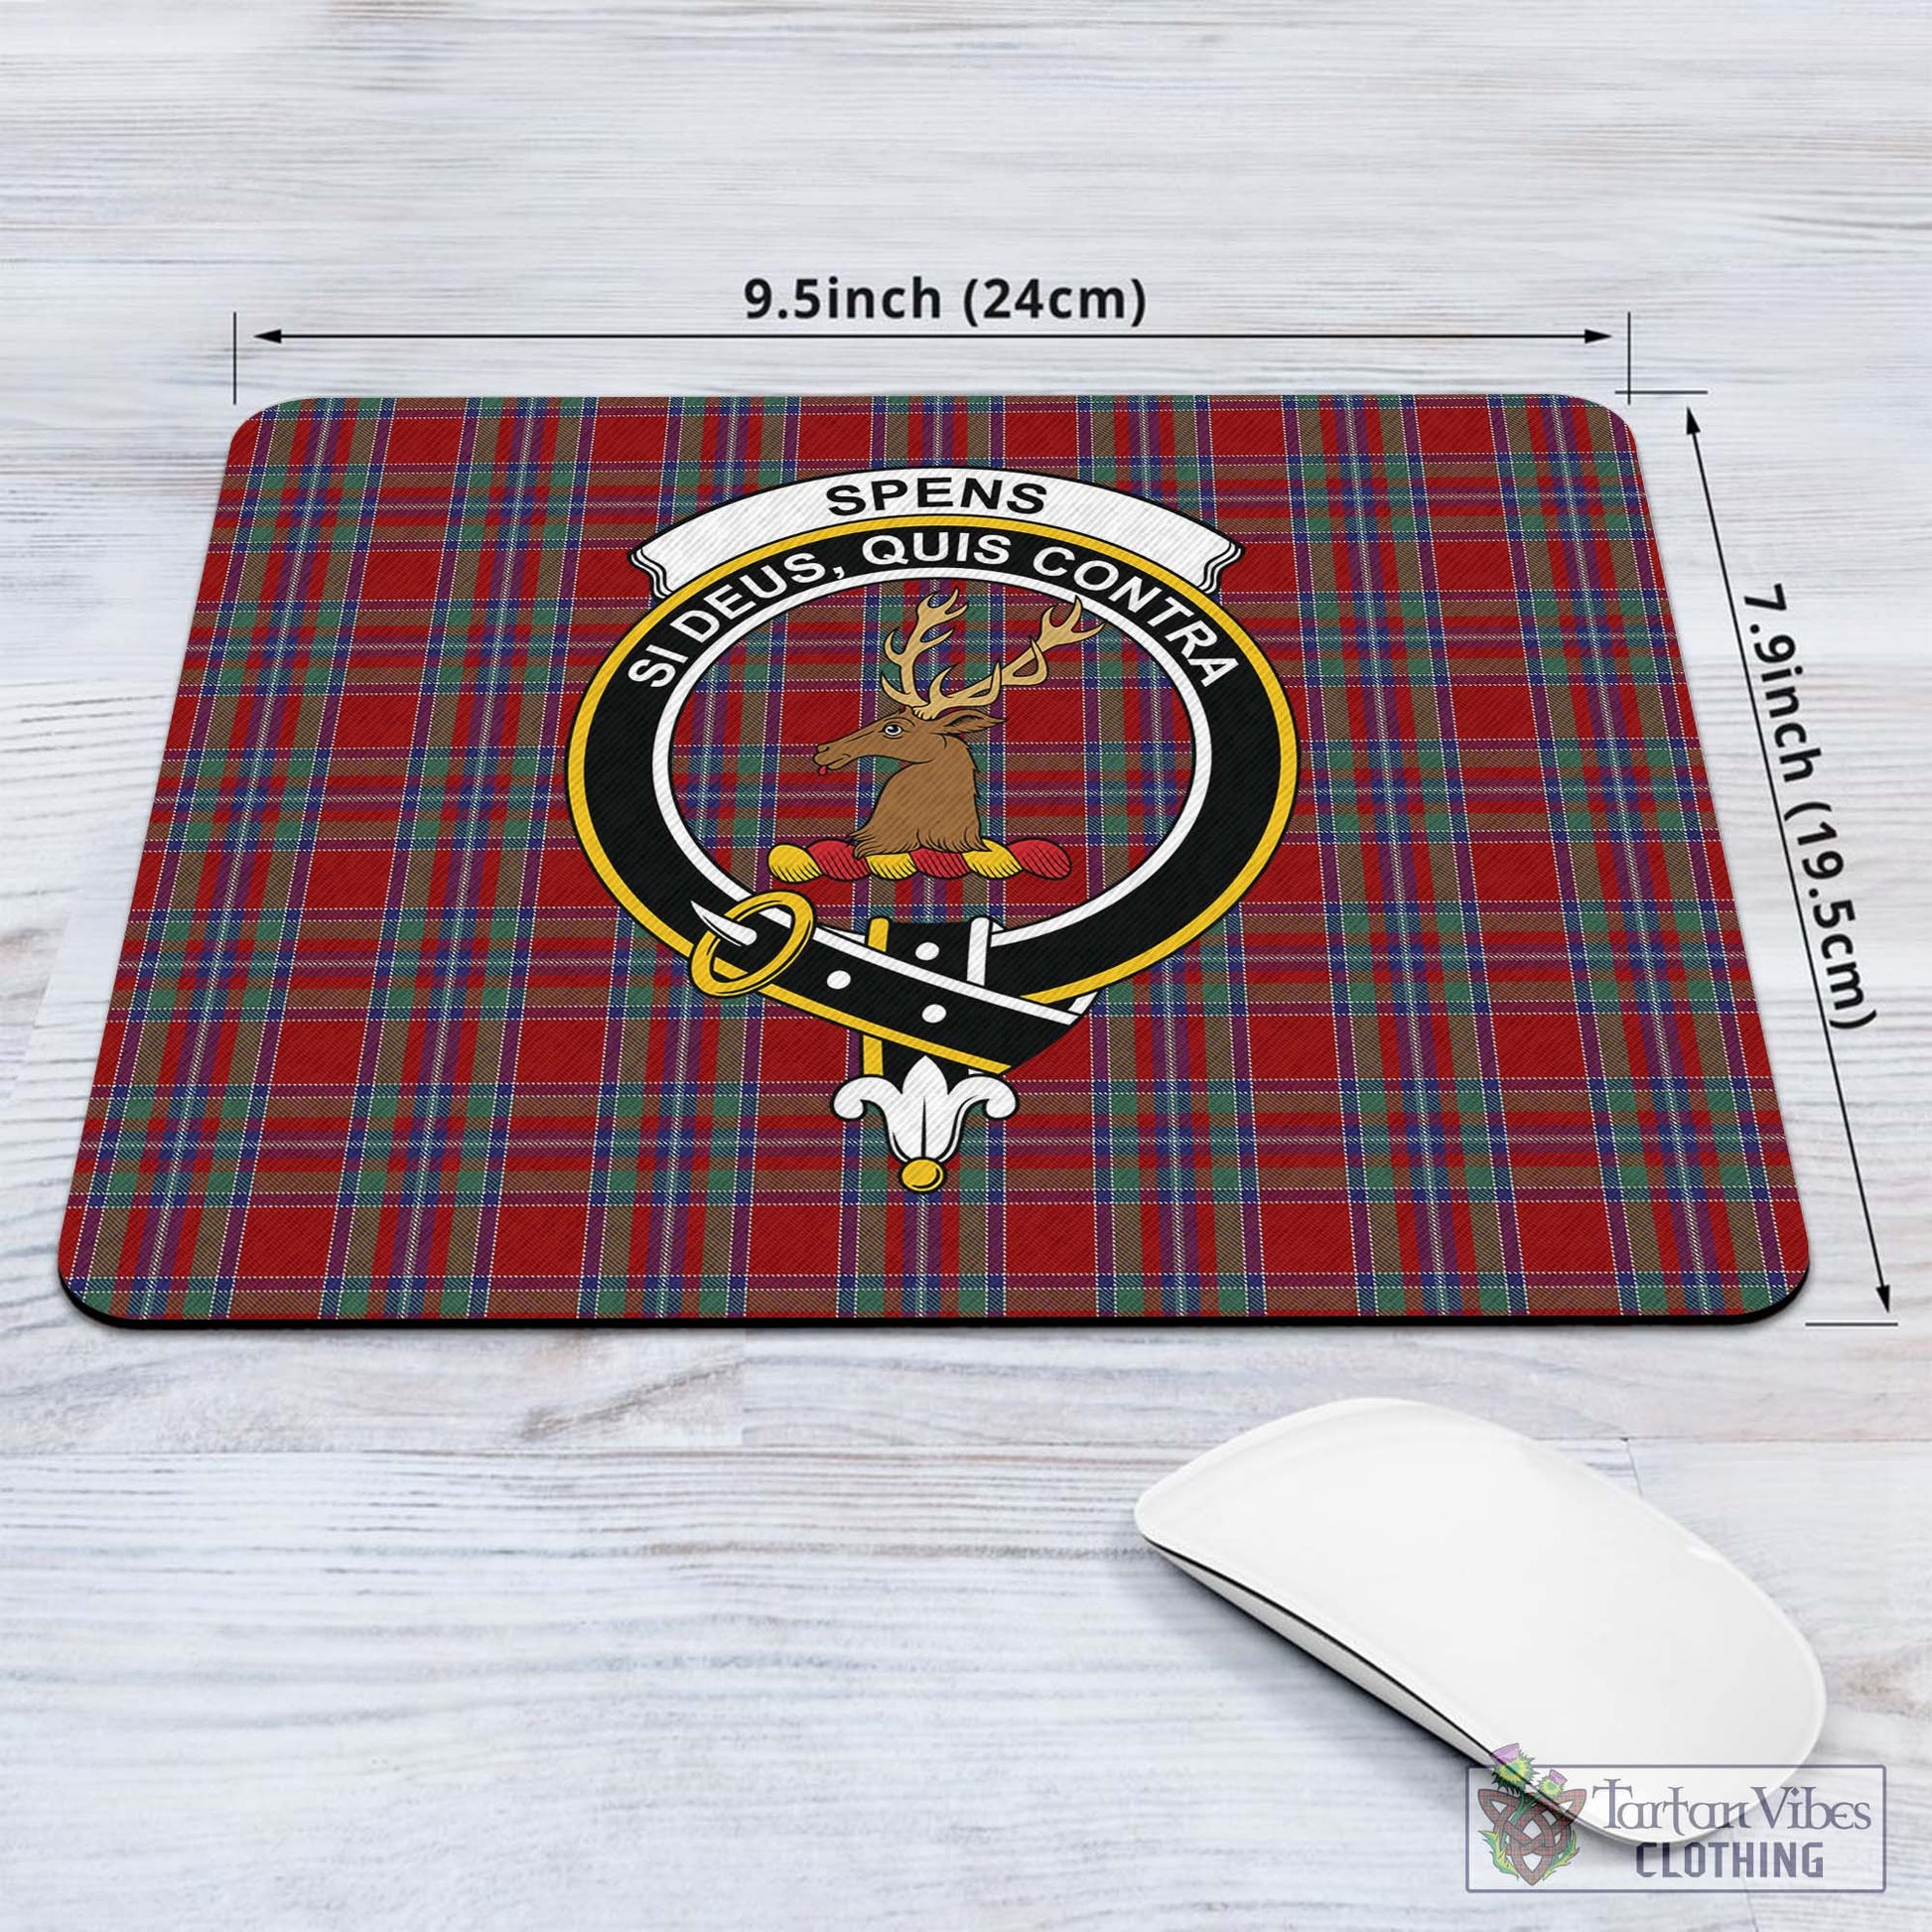 Tartan Vibes Clothing Spens Tartan Mouse Pad with Family Crest